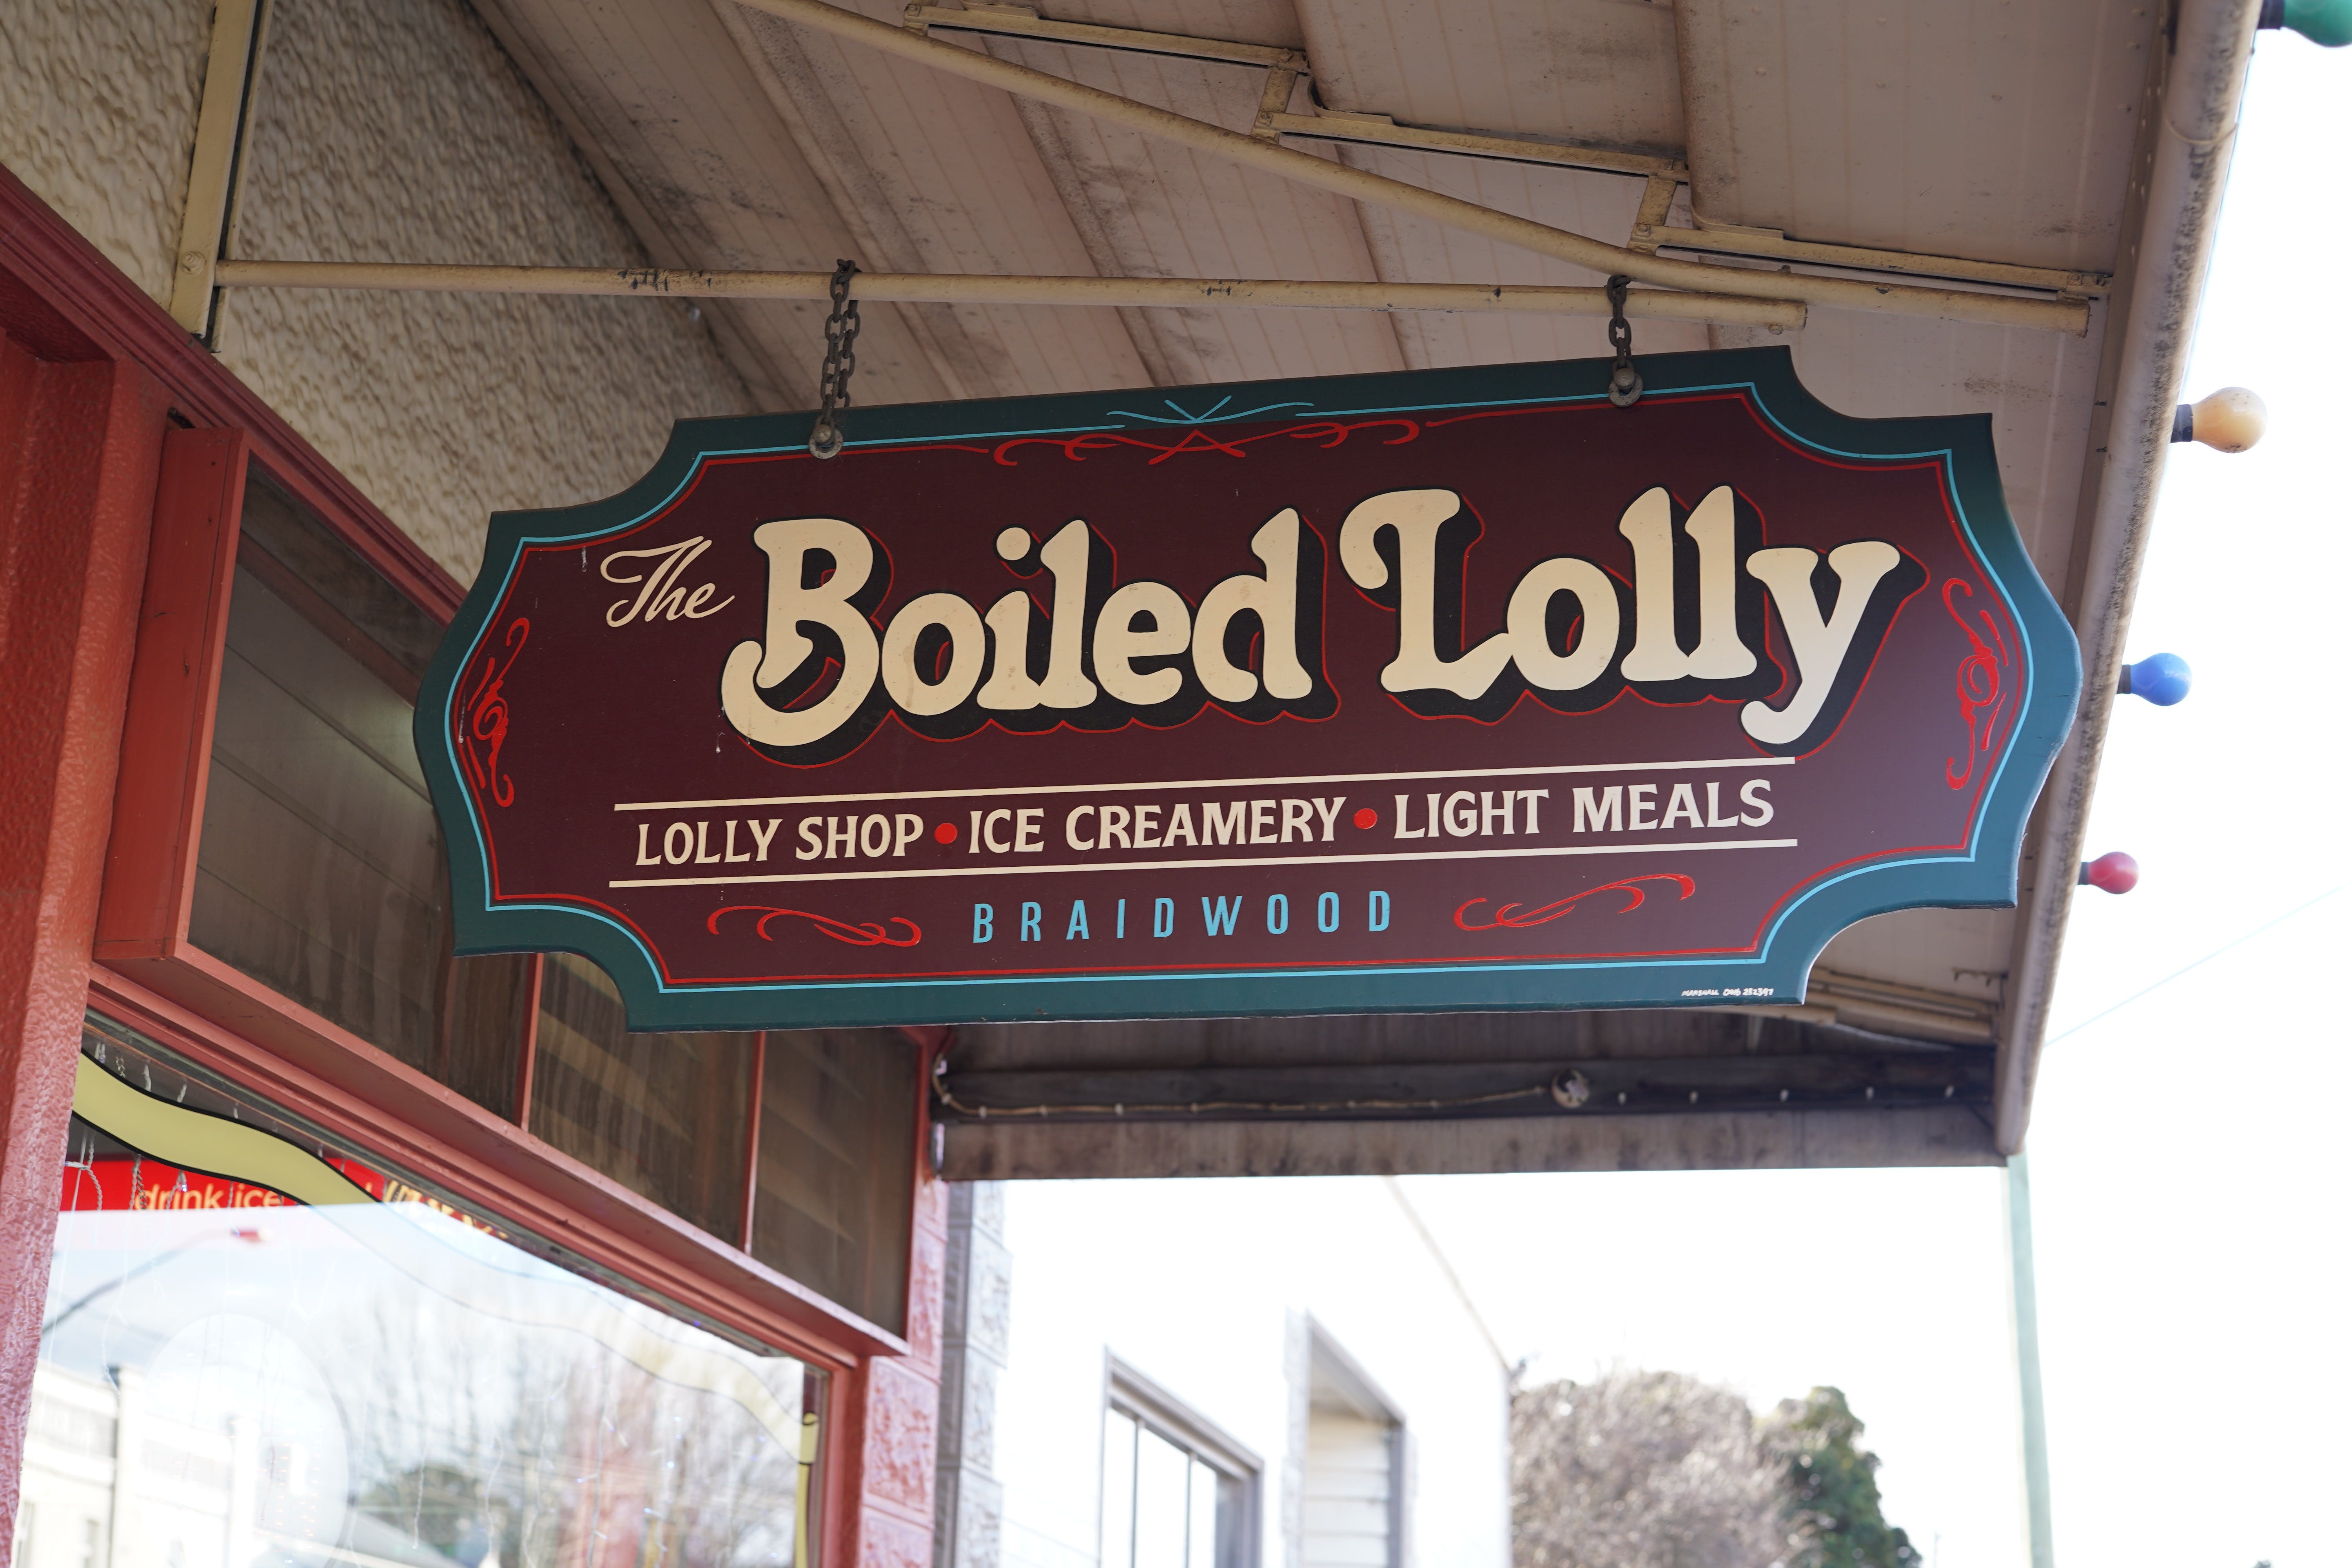 The Boiled Lolly - Attractions Sydney